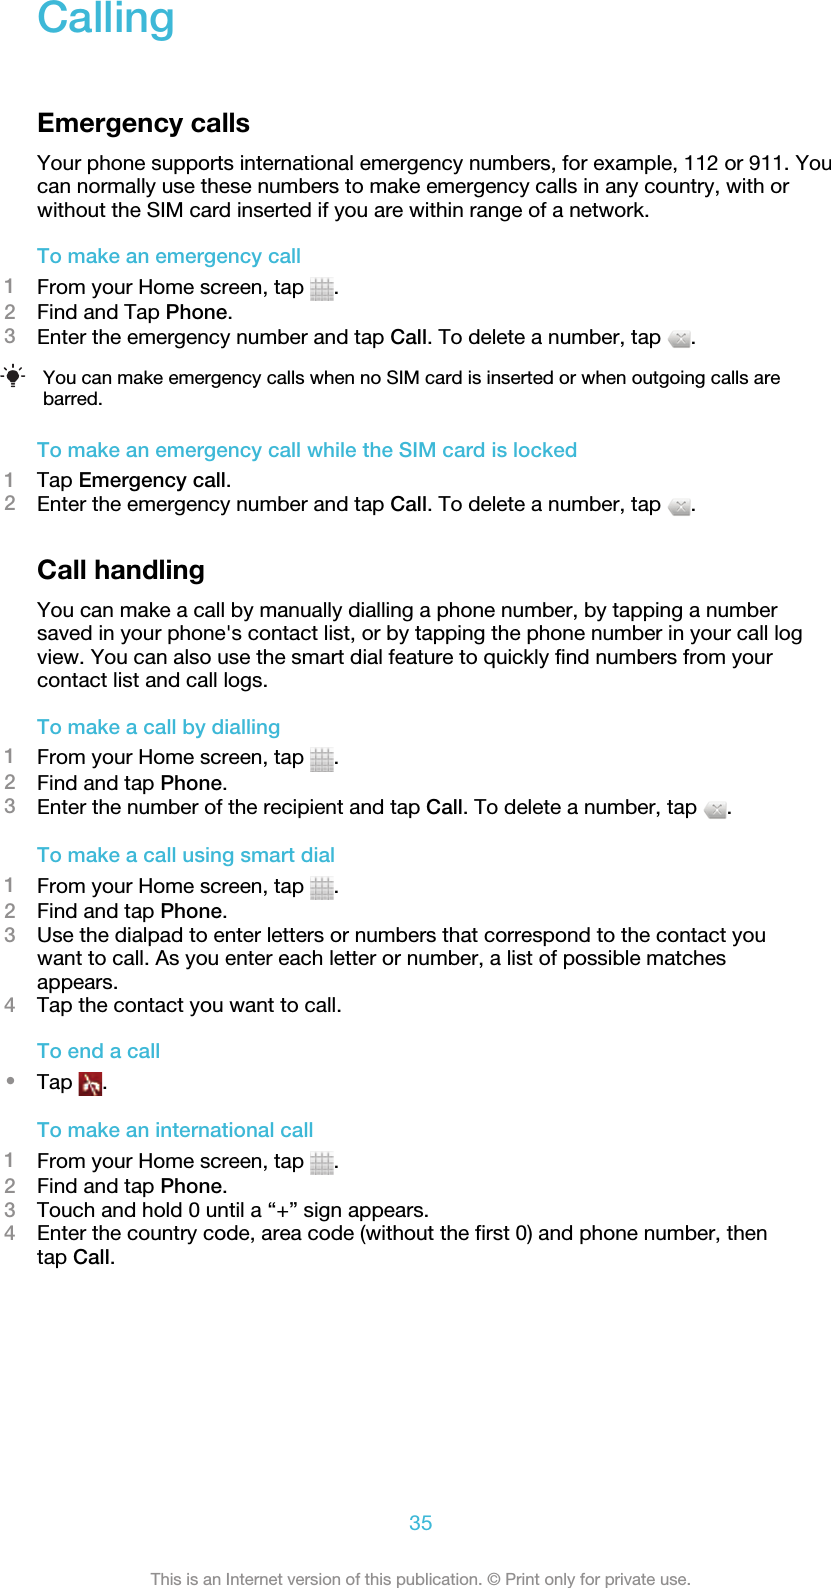 CallingEmergency callsYour phone supports international emergency numbers, for example, 112 or 911. Youcan normally use these numbers to make emergency calls in any country, with orwithout the SIM card inserted if you are within range of a network.To make an emergency call1From your Home screen, tap  .2Find and Tap Phone.3Enter the emergency number and tap Call. To delete a number, tap  .You can make emergency calls when no SIM card is inserted or when outgoing calls arebarred.To make an emergency call while the SIM card is locked1Tap Emergency call.2Enter the emergency number and tap Call. To delete a number, tap  .Call handlingYou can make a call by manually dialling a phone number, by tapping a numbersaved in your phone&apos;s contact list, or by tapping the phone number in your call logview. You can also use the smart dial feature to quickly find numbers from yourcontact list and call logs.To make a call by dialling1From your Home screen, tap  .2Find and tap Phone.3Enter the number of the recipient and tap Call. To delete a number, tap  .To make a call using smart dial1From your Home screen, tap  .2Find and tap Phone.3Use the dialpad to enter letters or numbers that correspond to the contact youwant to call. As you enter each letter or number, a list of possible matchesappears.4Tap the contact you want to call.To end a call•Tap  .To make an international call1From your Home screen, tap  .2Find and tap Phone.3Touch and hold 0 until a “+” sign appears.4Enter the country code, area code (without the first 0) and phone number, thentap Call.35This is an Internet version of this publication. © Print only for private use.